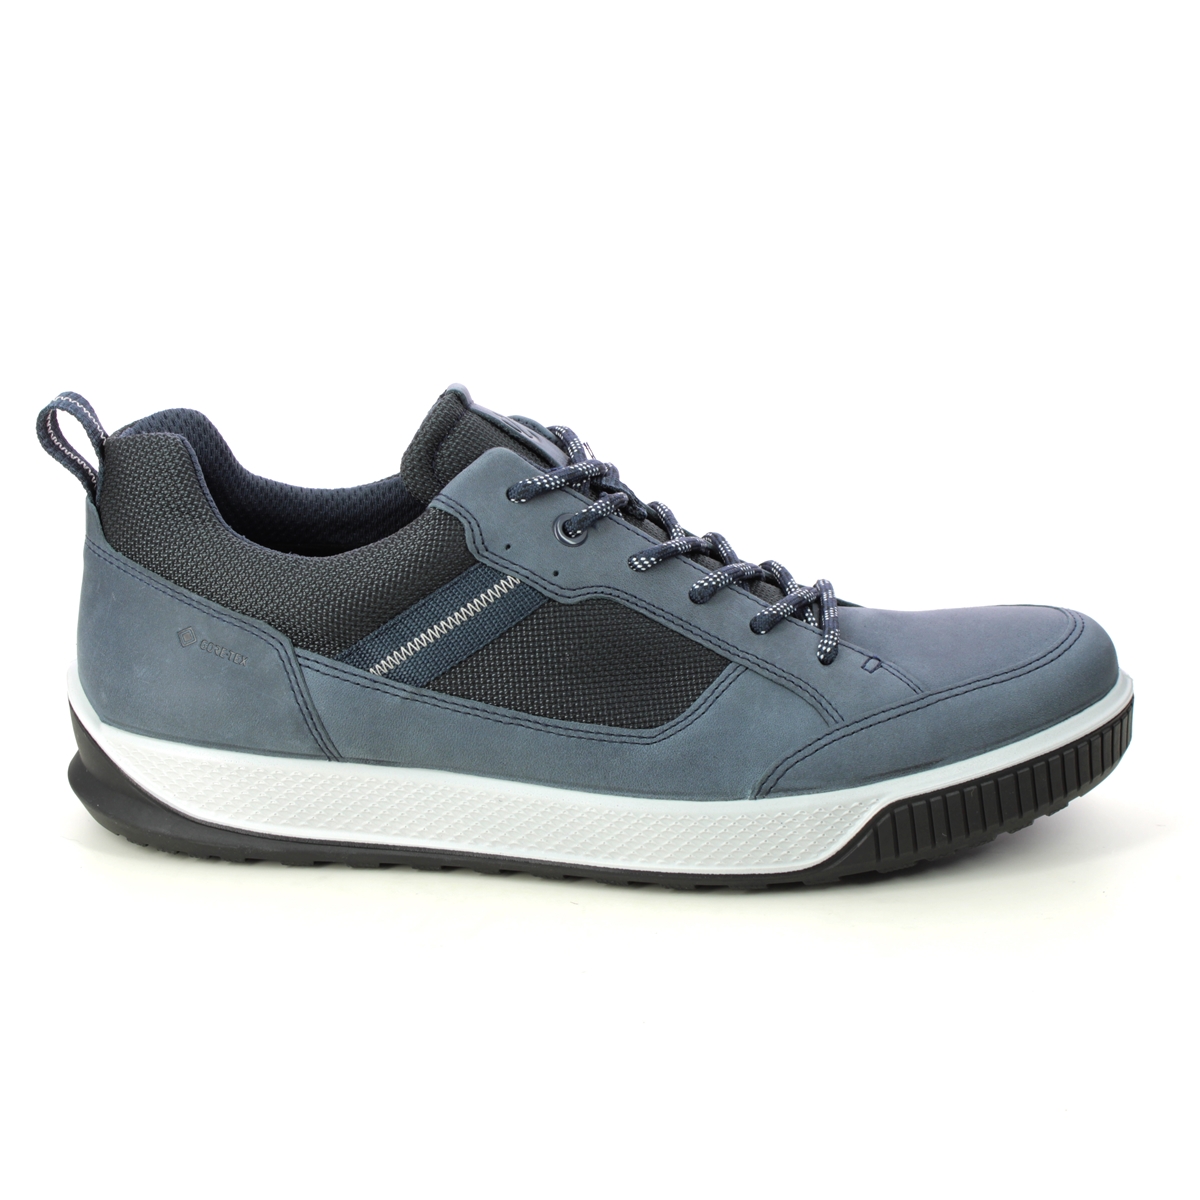 ECCO Byway Tred Gore Navy leather Mens comfort shoes 501874-50595